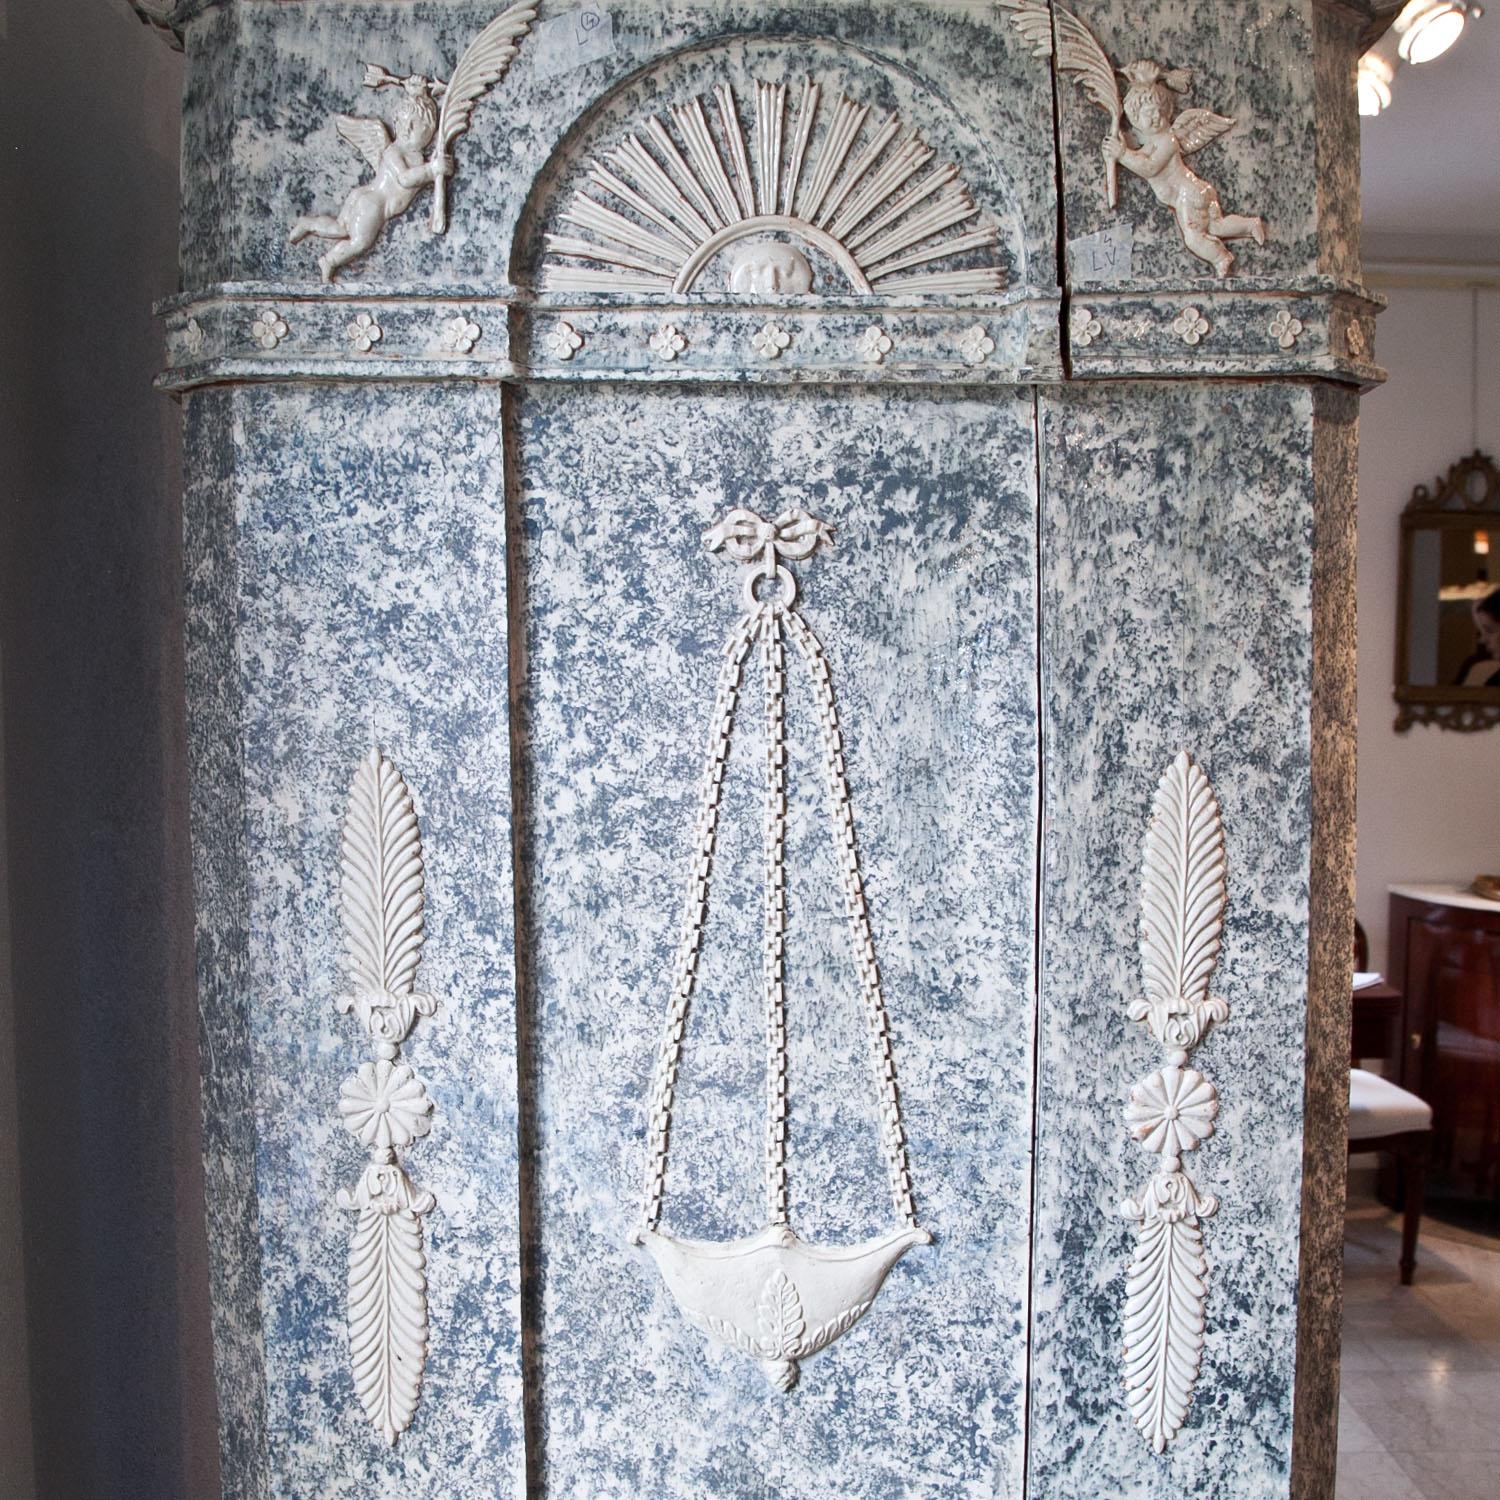 Porcelain Neoclassical Tiled Stove, Prob. Austria, 1st Third of the 19th Century